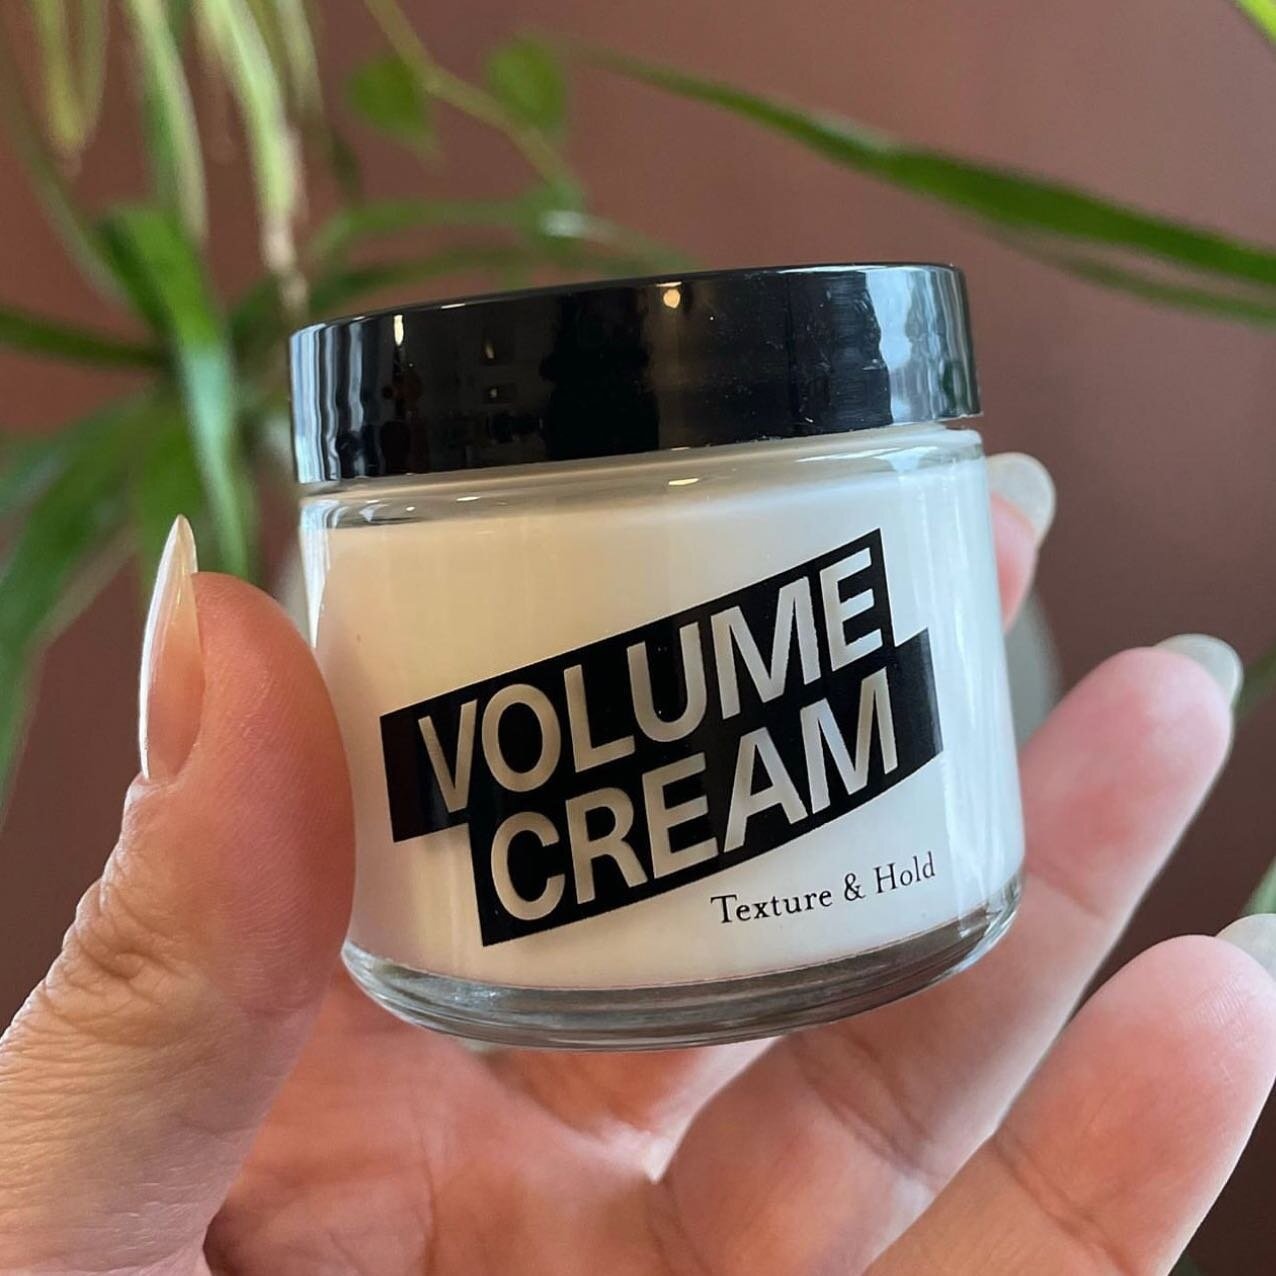 Repost Alert: image and text via @trimdc 

&ldquo;One of our favorite new products of the past year. Like mousse without the aerosol. We love it for adding all the light fluff and bounce to your hair and maintaining definition. Any texture, any day i